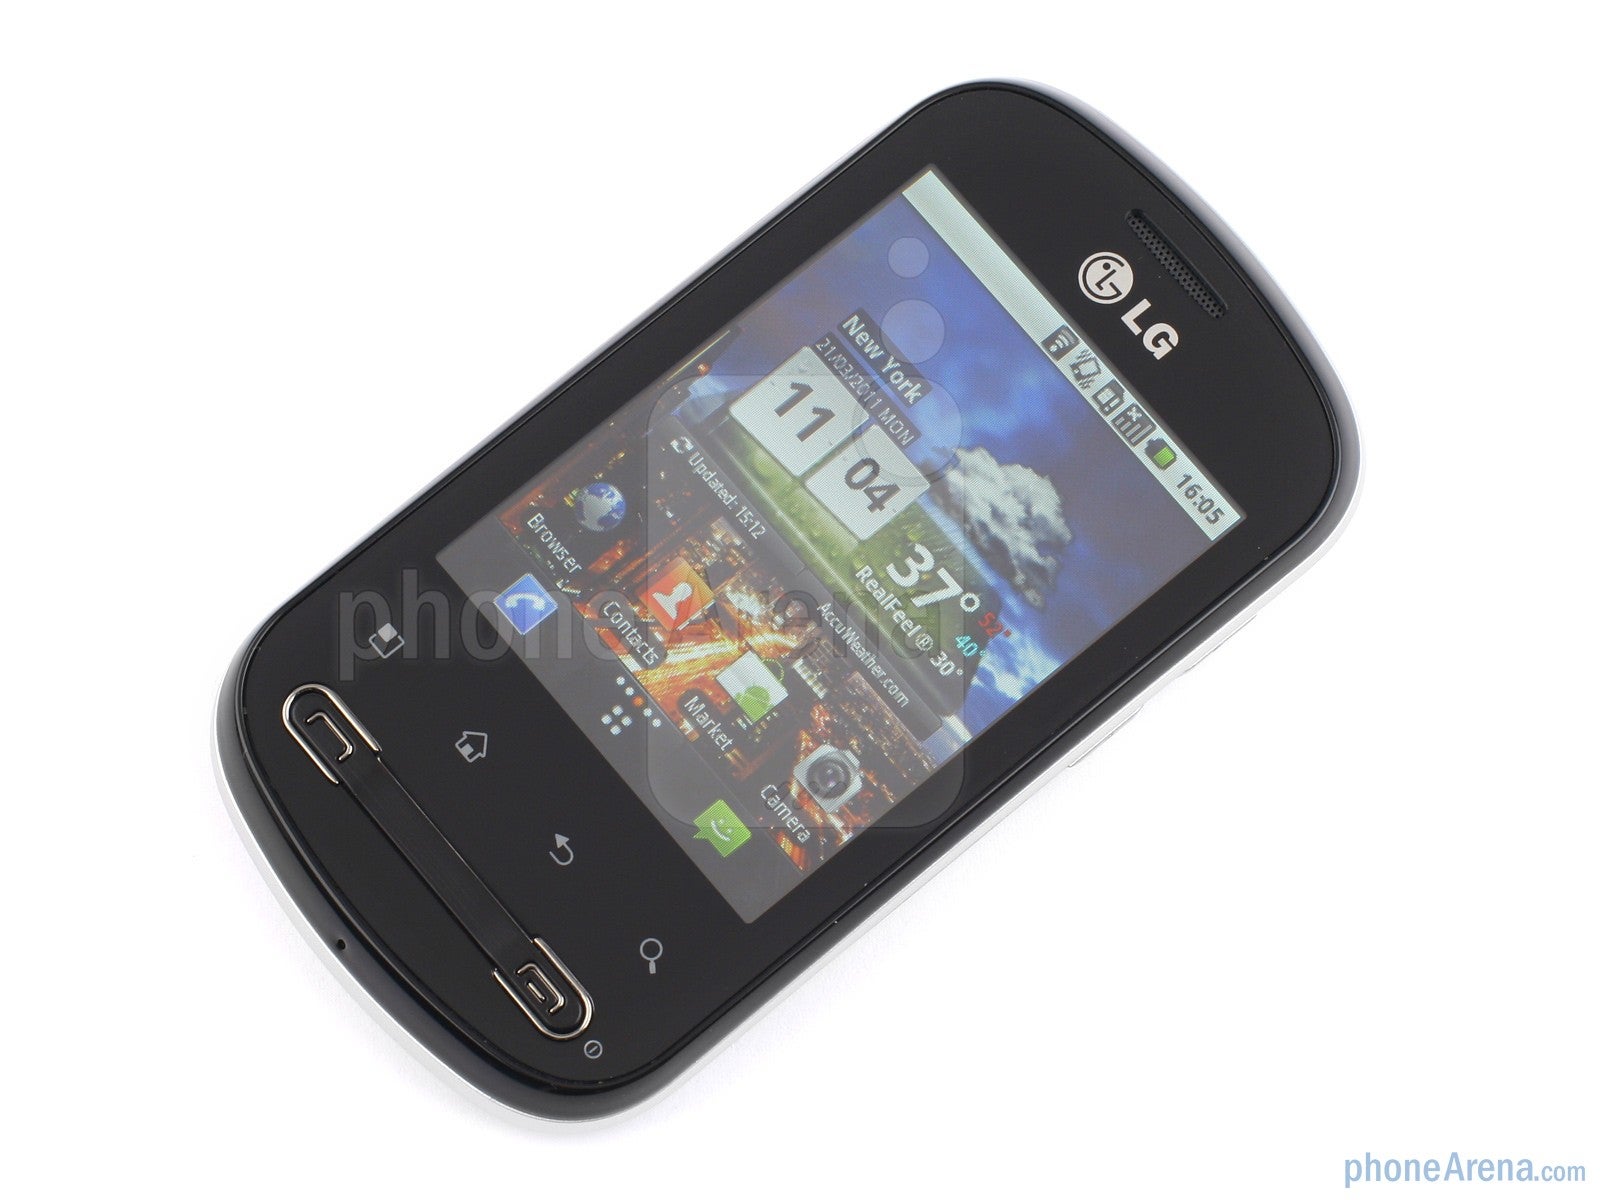 The screen has a resolution of 240x320 px - LG Optimus Me P350 Review